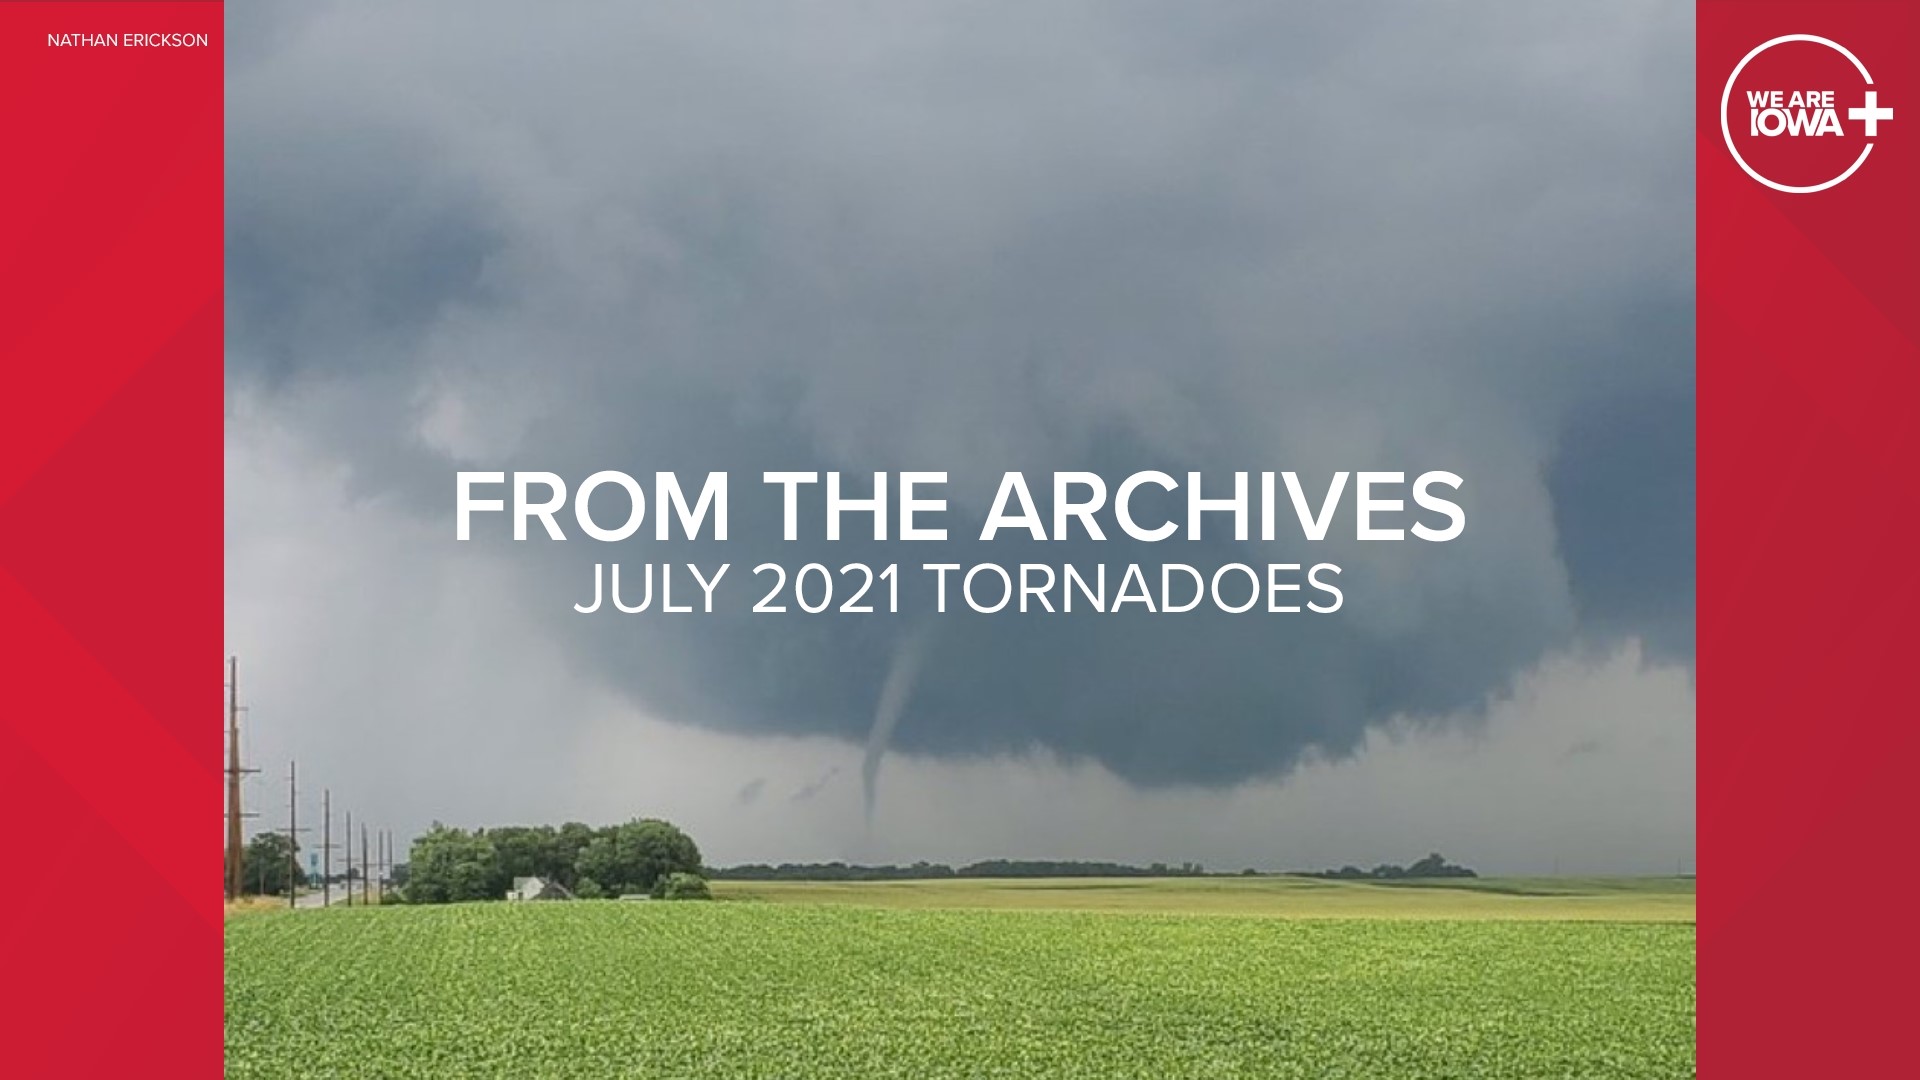 Take a look back on July 2021, when tornadoes struck North Central Iowa.